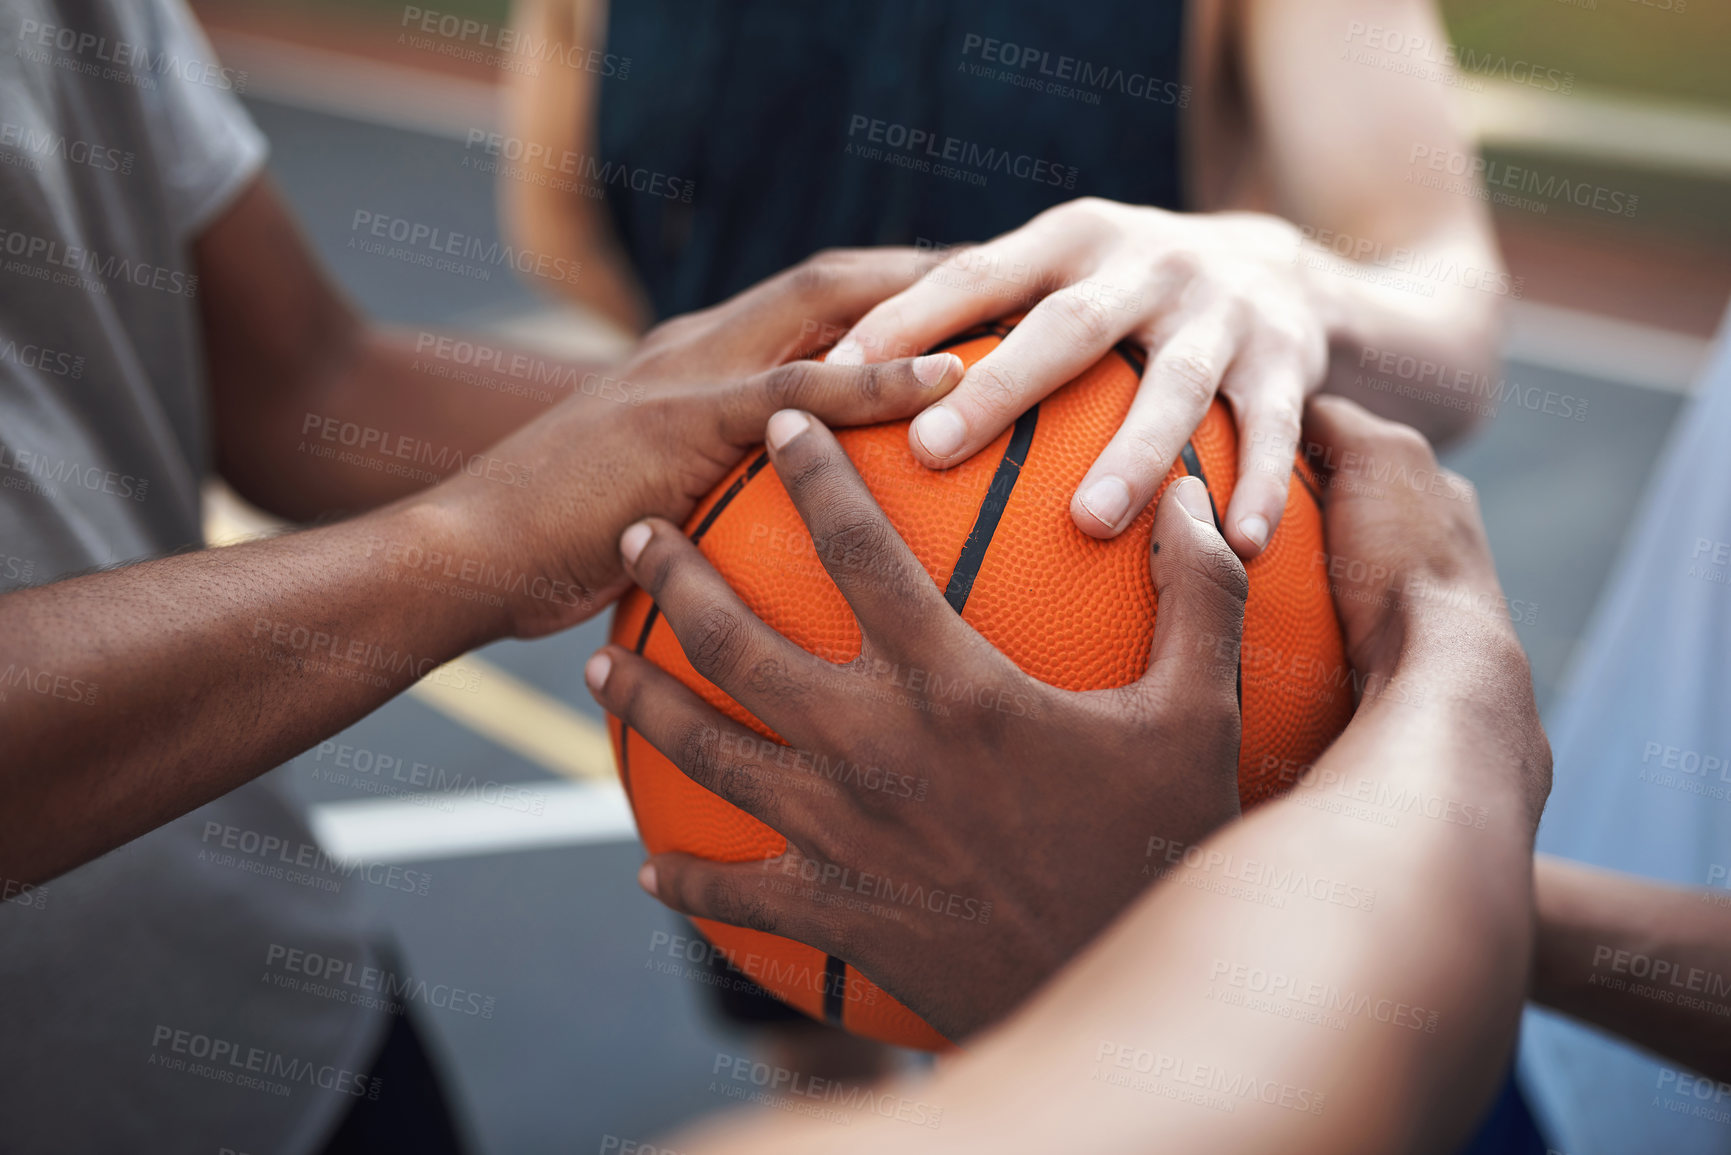 Buy stock photo Closeup shot of a group of sporty young men huddled around a basketball on a sports court